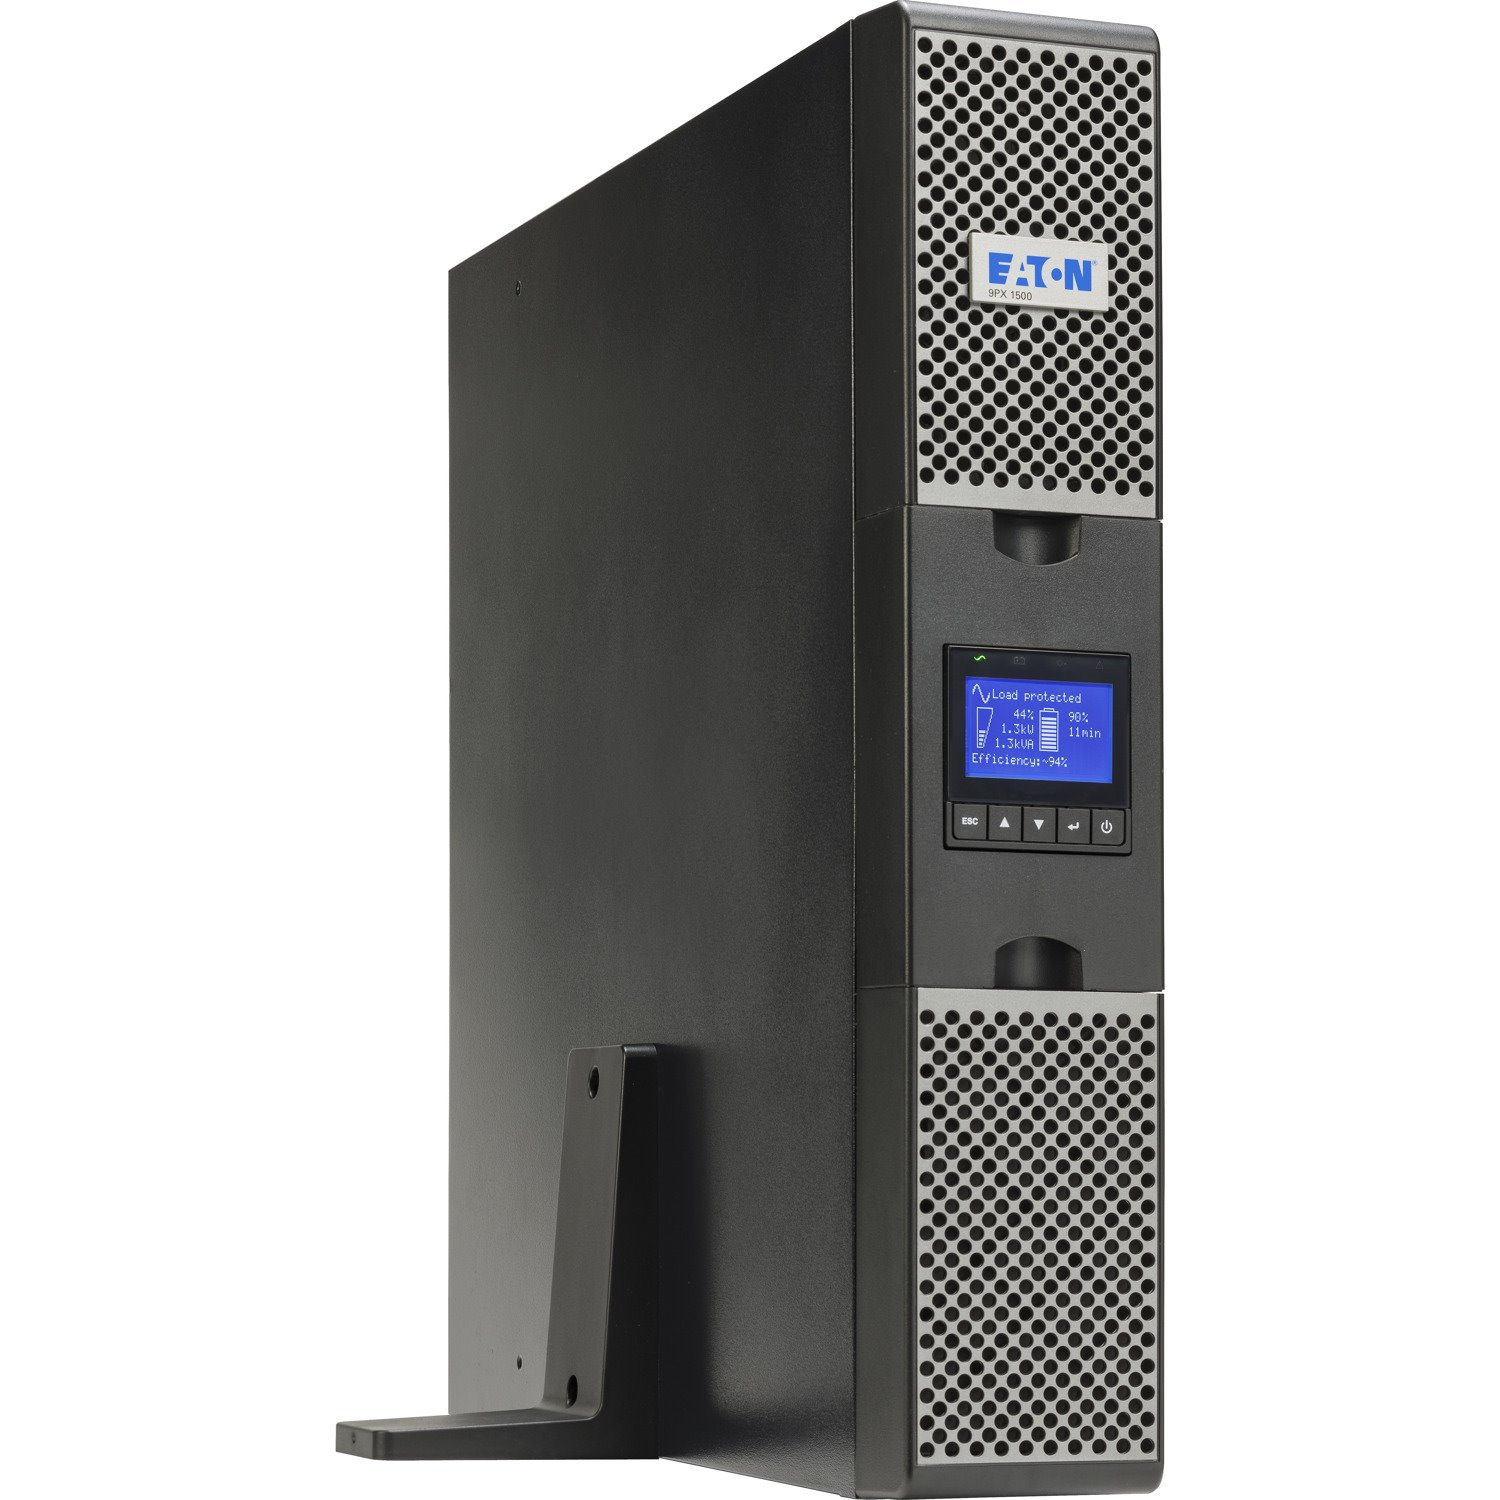 Eaton 9PX 1500VA 1350W 208V Online Double-Conversion UPS - C14 Input, 8 C13 Outlets, Cybersecure Network Card Option, Extended Run, 2U Rack/Tower - Battery Backup